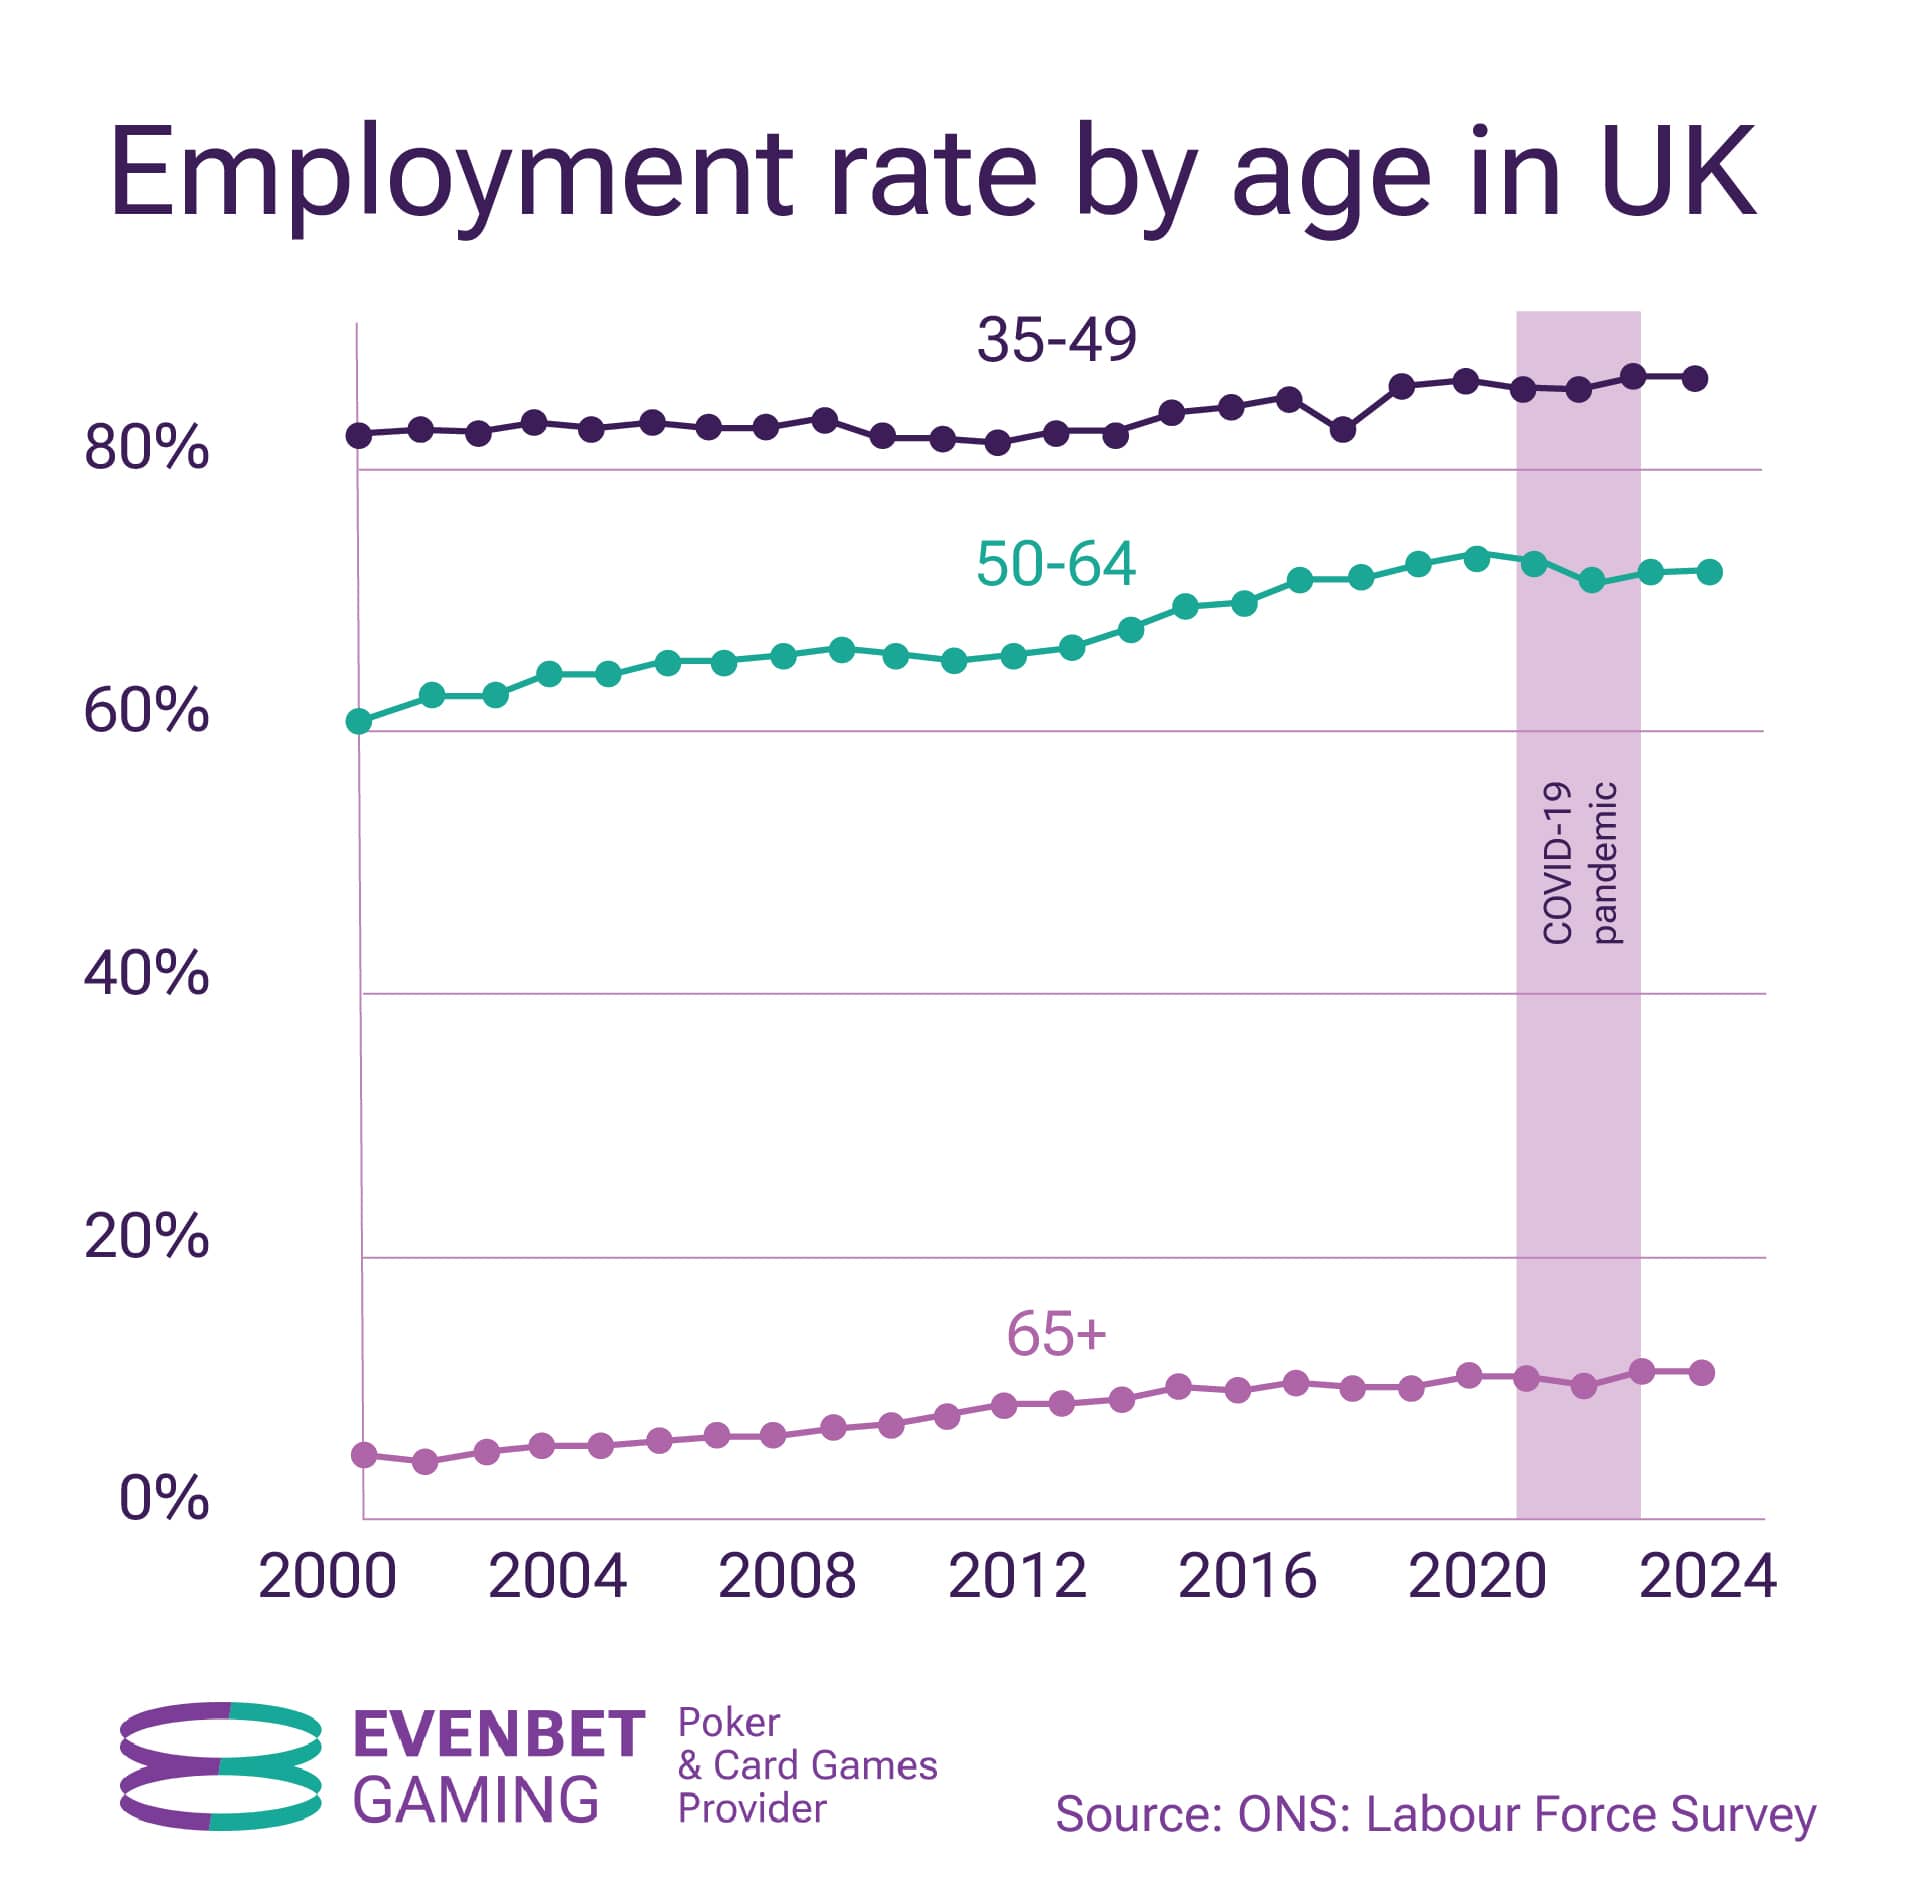 Employment rate by age in UK, 2024